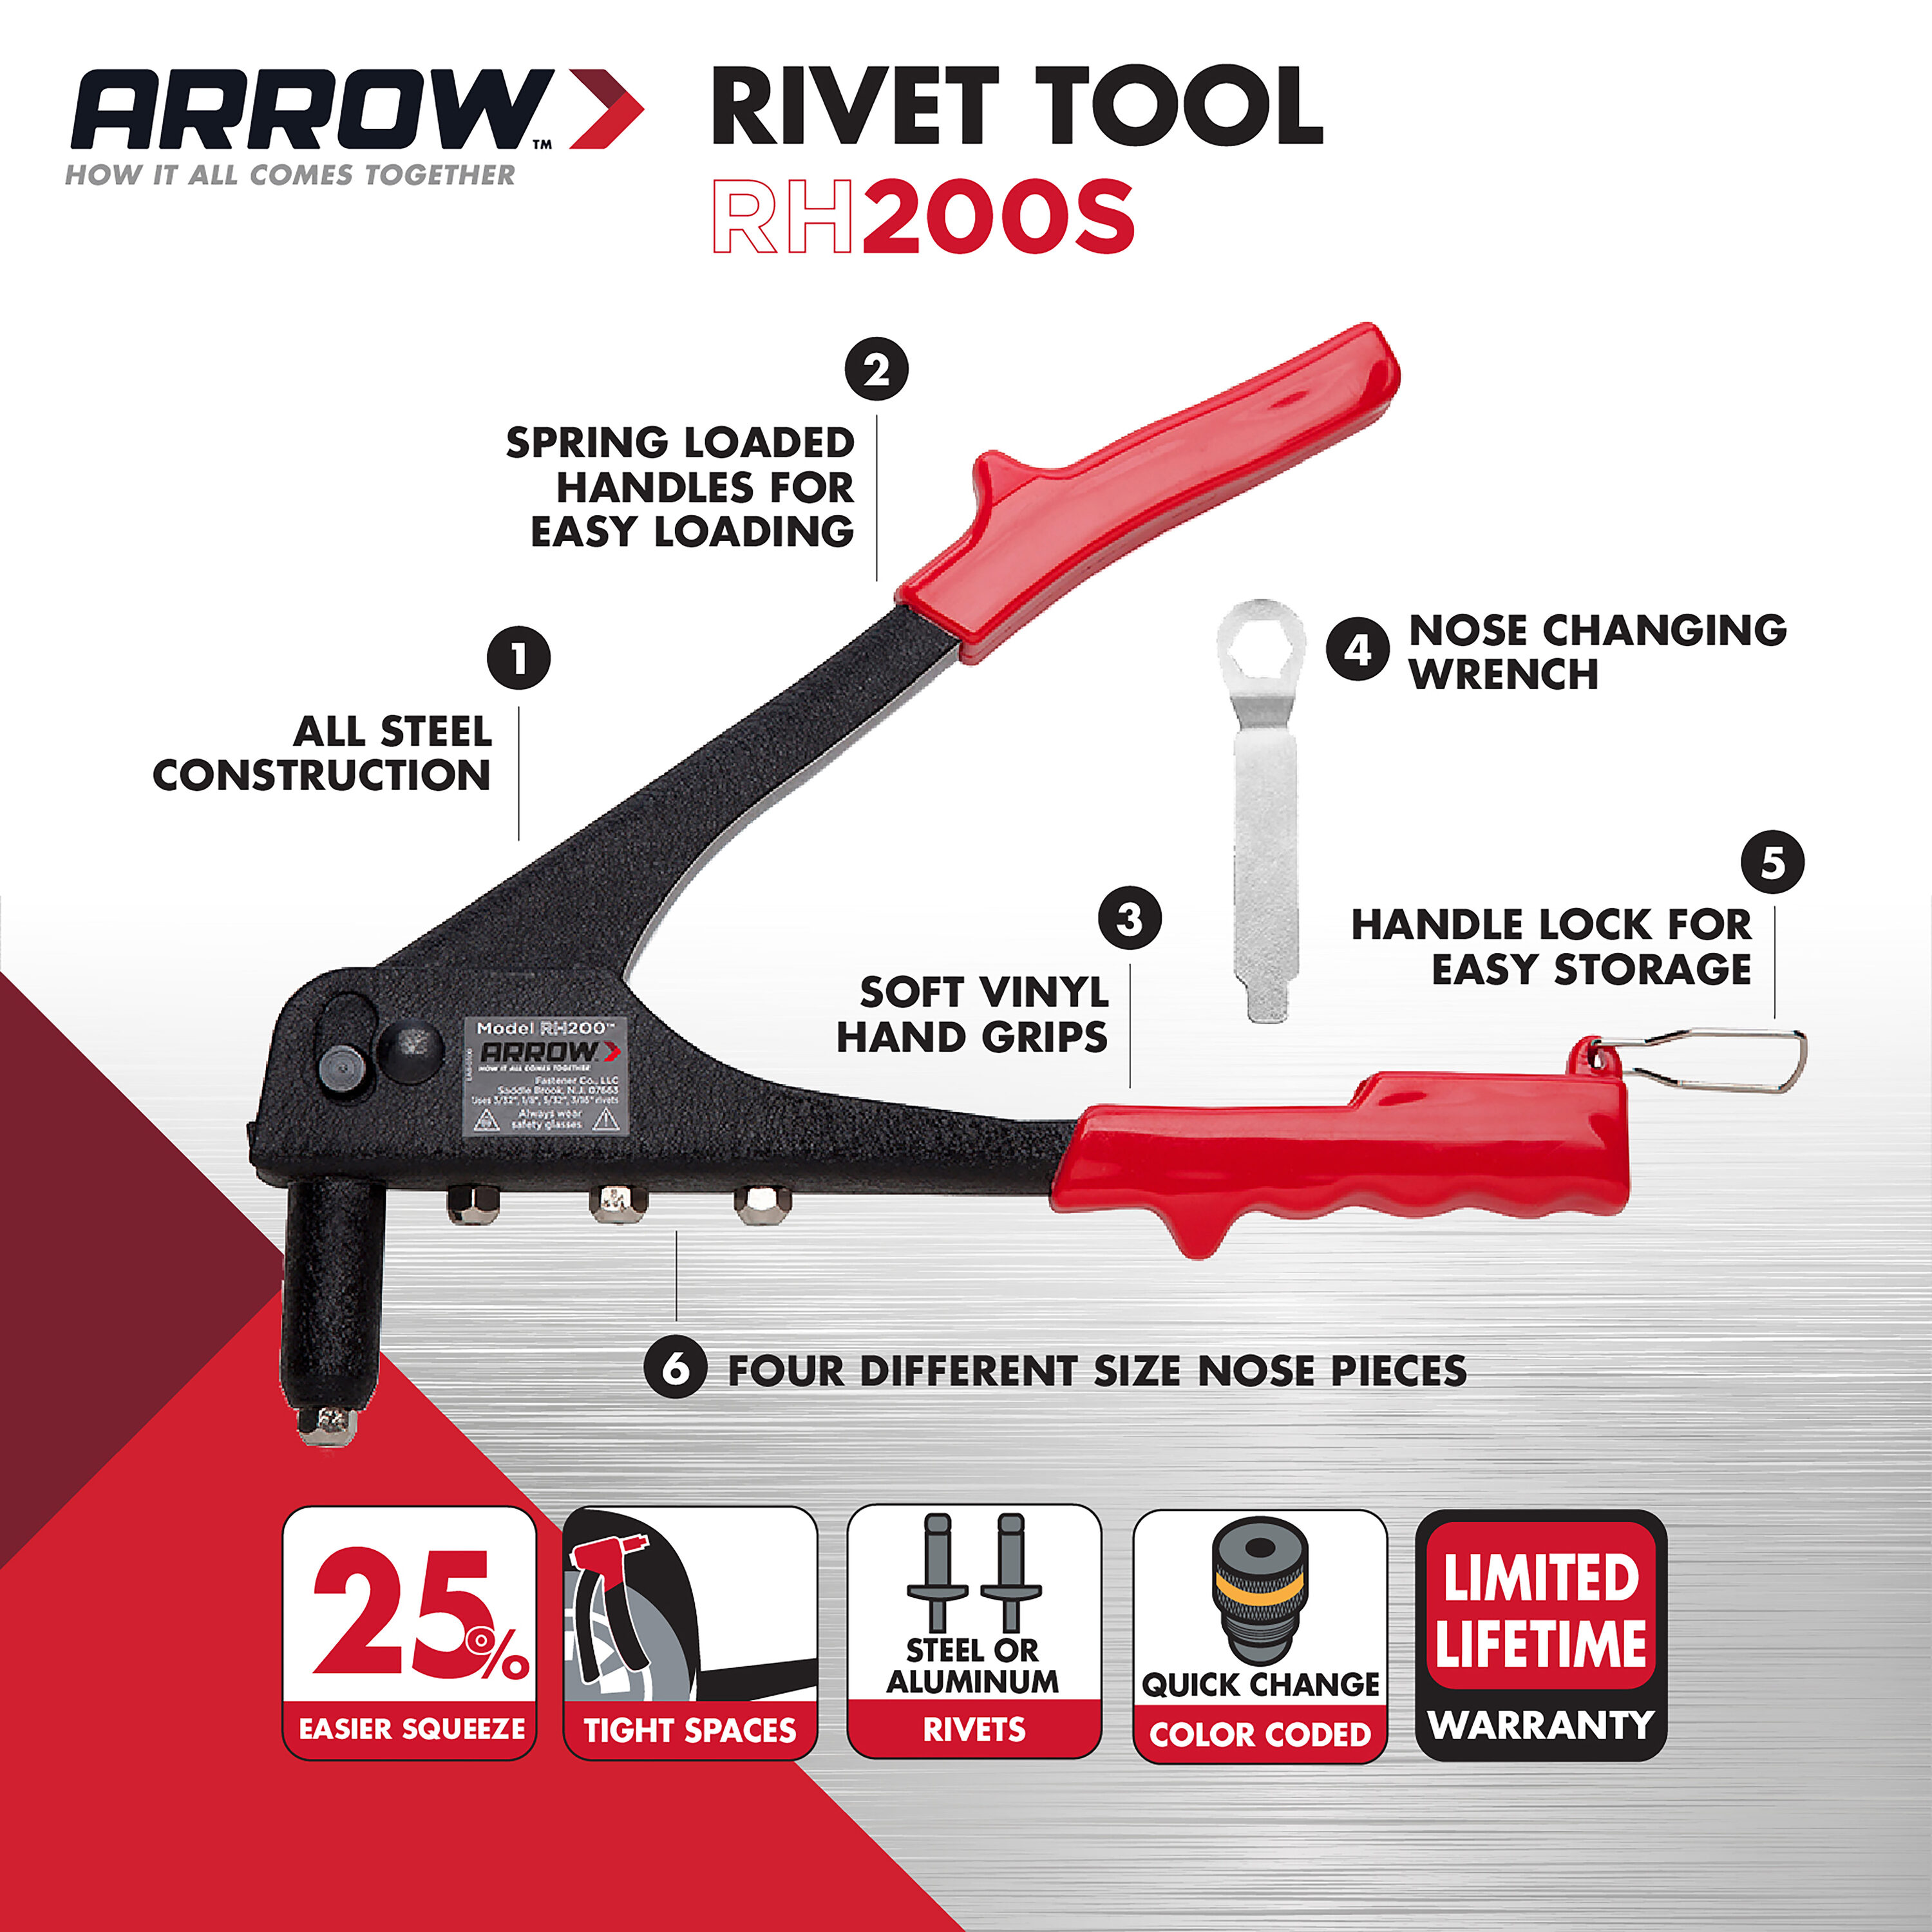 Arrow Heavy Duty Rivet Tool - Black - Automotive, Lawn Furniture, Metal  Work - 3/32-in to 3/16-in Riveter Sizes - Includes 4 Rivet Heads in the  Riveters department at